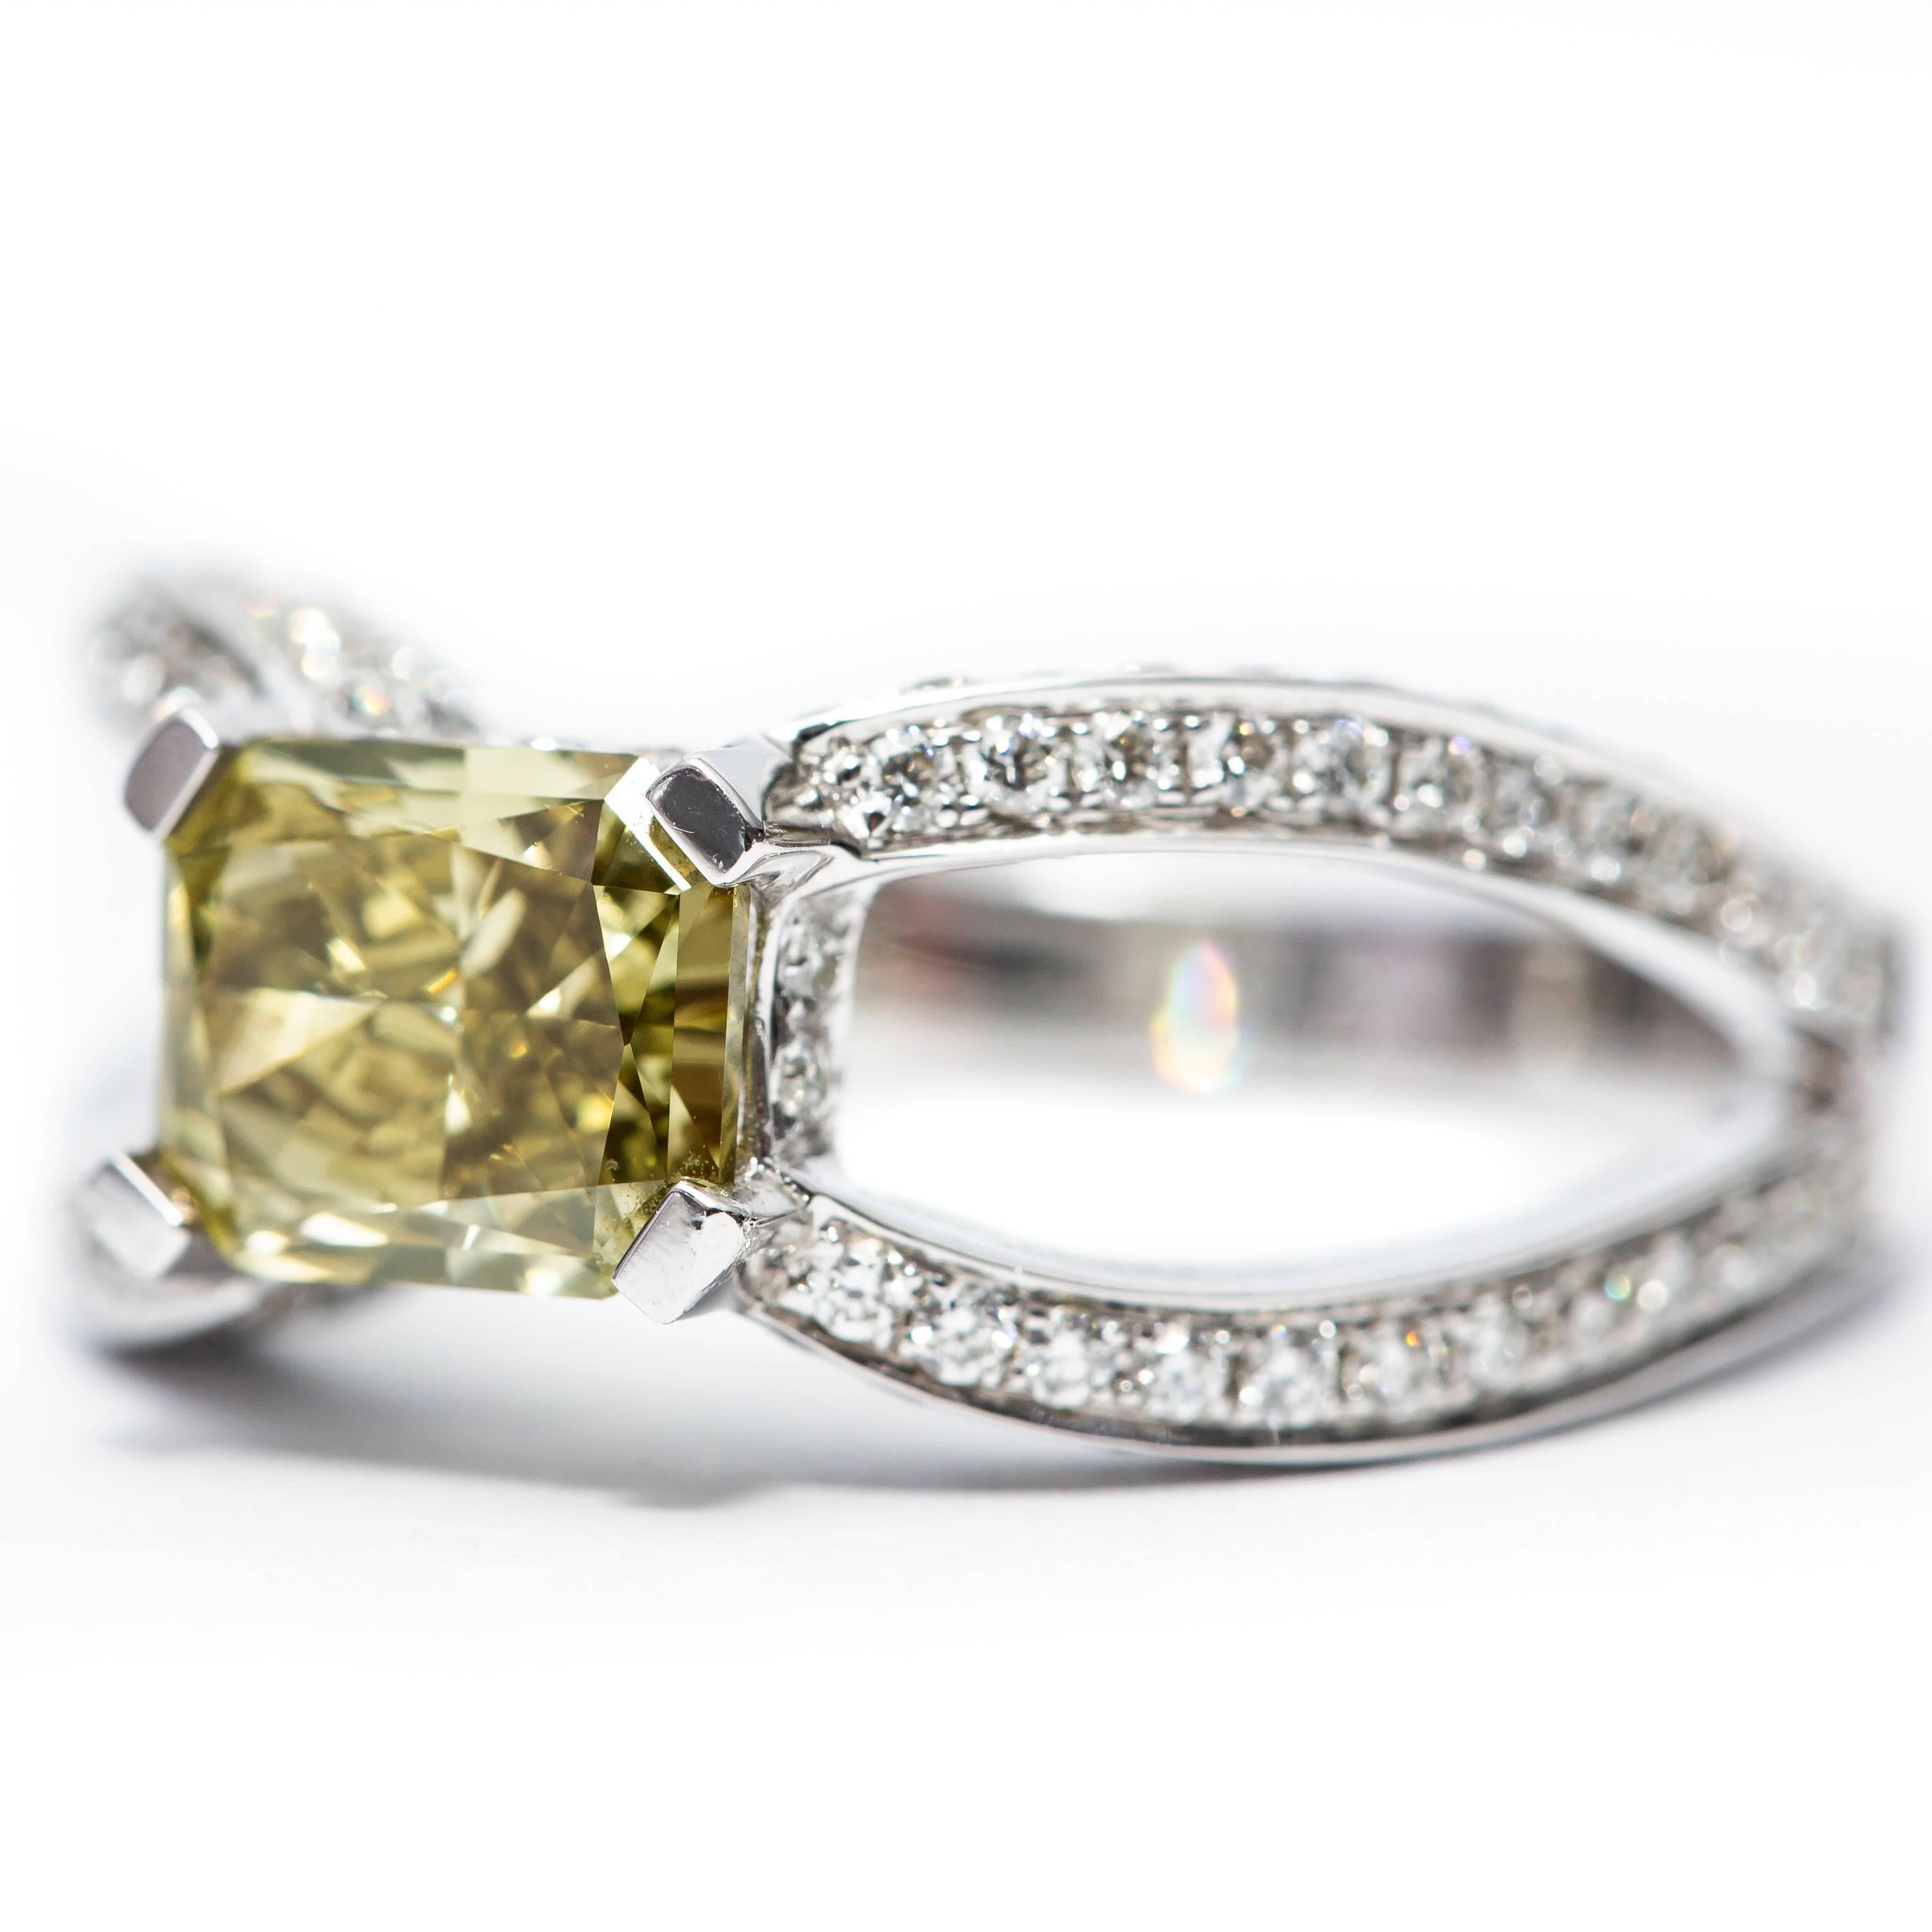 This stunning GIA Certified 1.14 Carat Natural Fancy Dark Brown-Greenish Yellow Radiant Cut - Cornered rectangular modified Diamond situated in the center of the ring featuring 0.80 Carat clarity SI1 with Round Brilliant Diamond down the split Shank